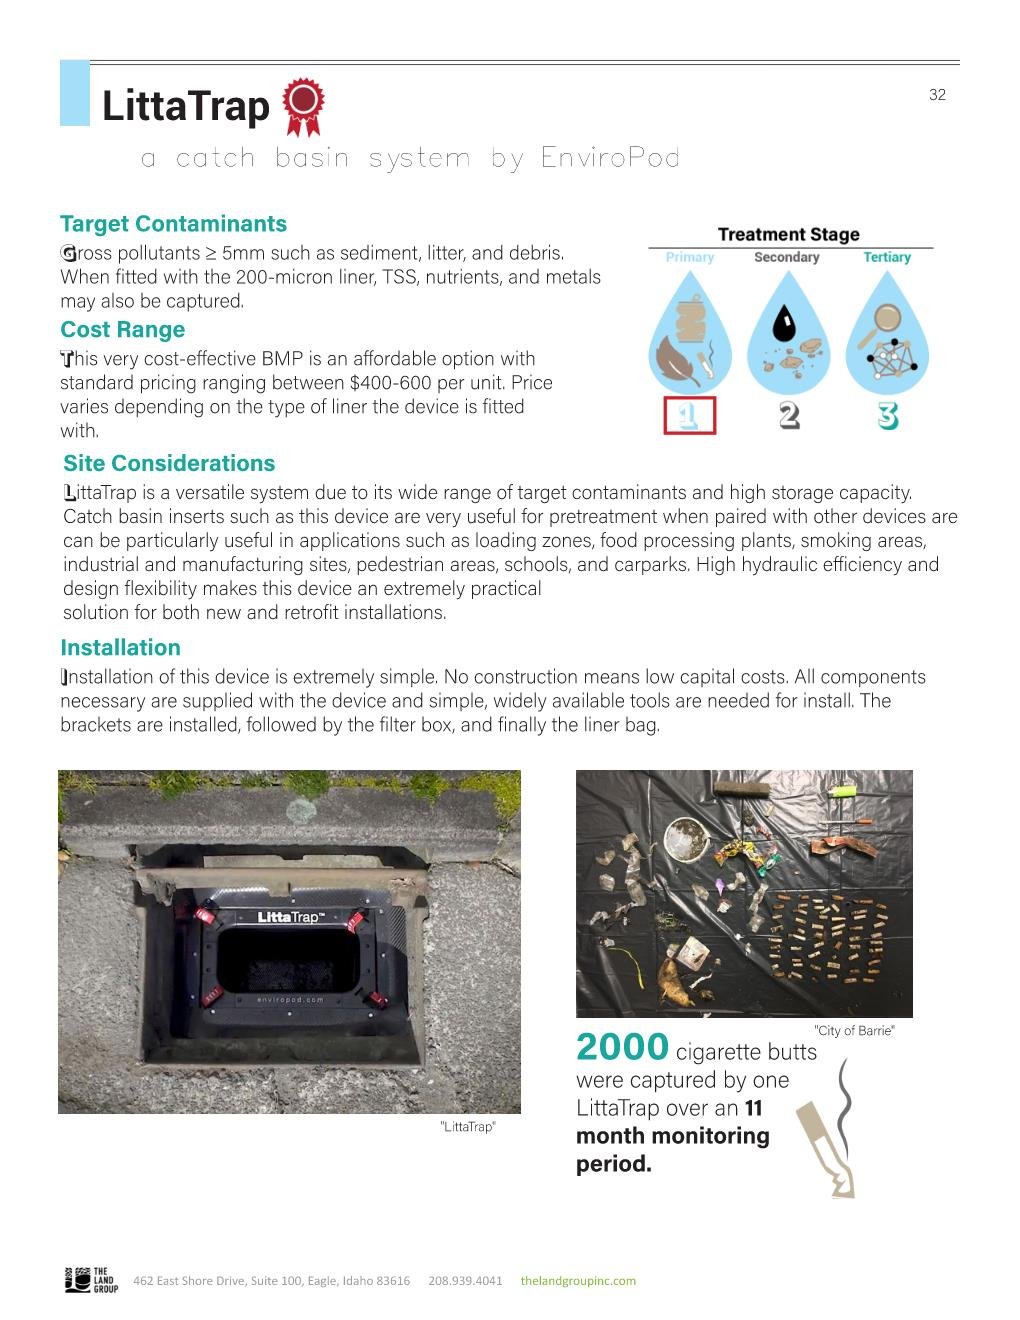 Stormwater Management Technology Comparison Toolkit Page 032.jpg